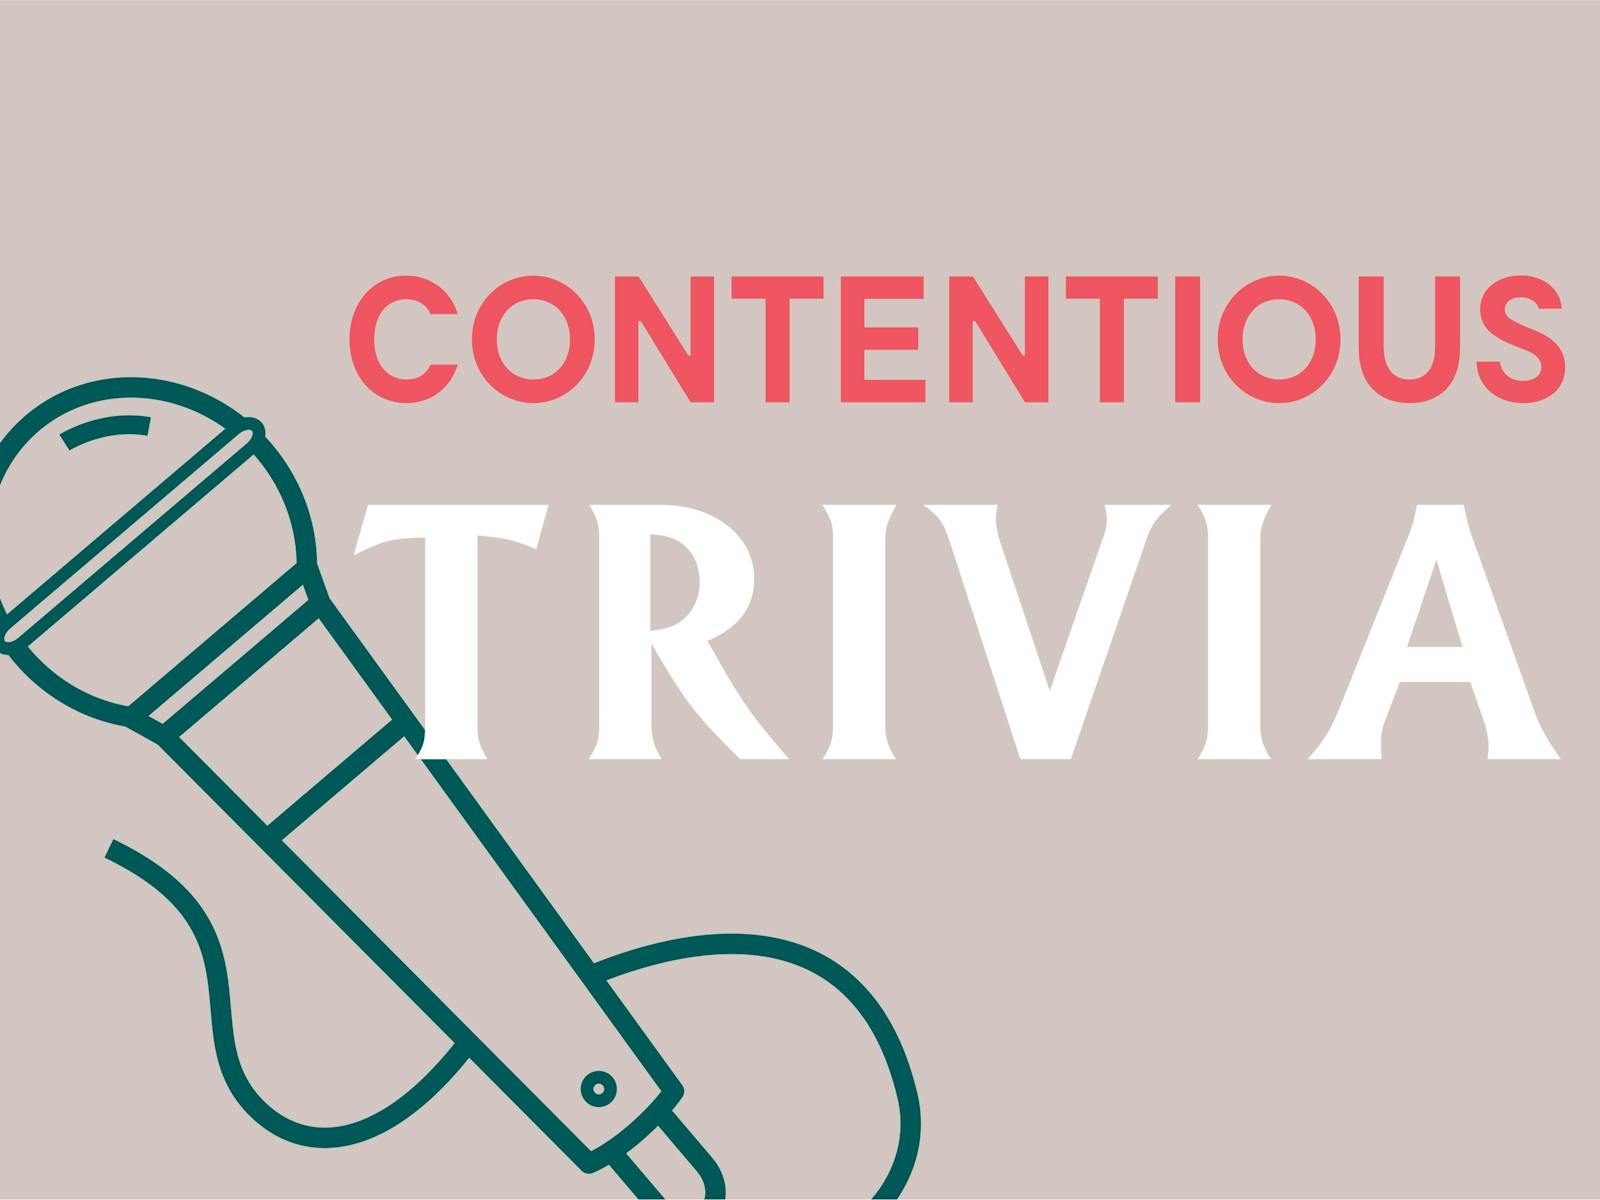 Image for Contentious Trivia & Pizza  - Weekly Thursdays